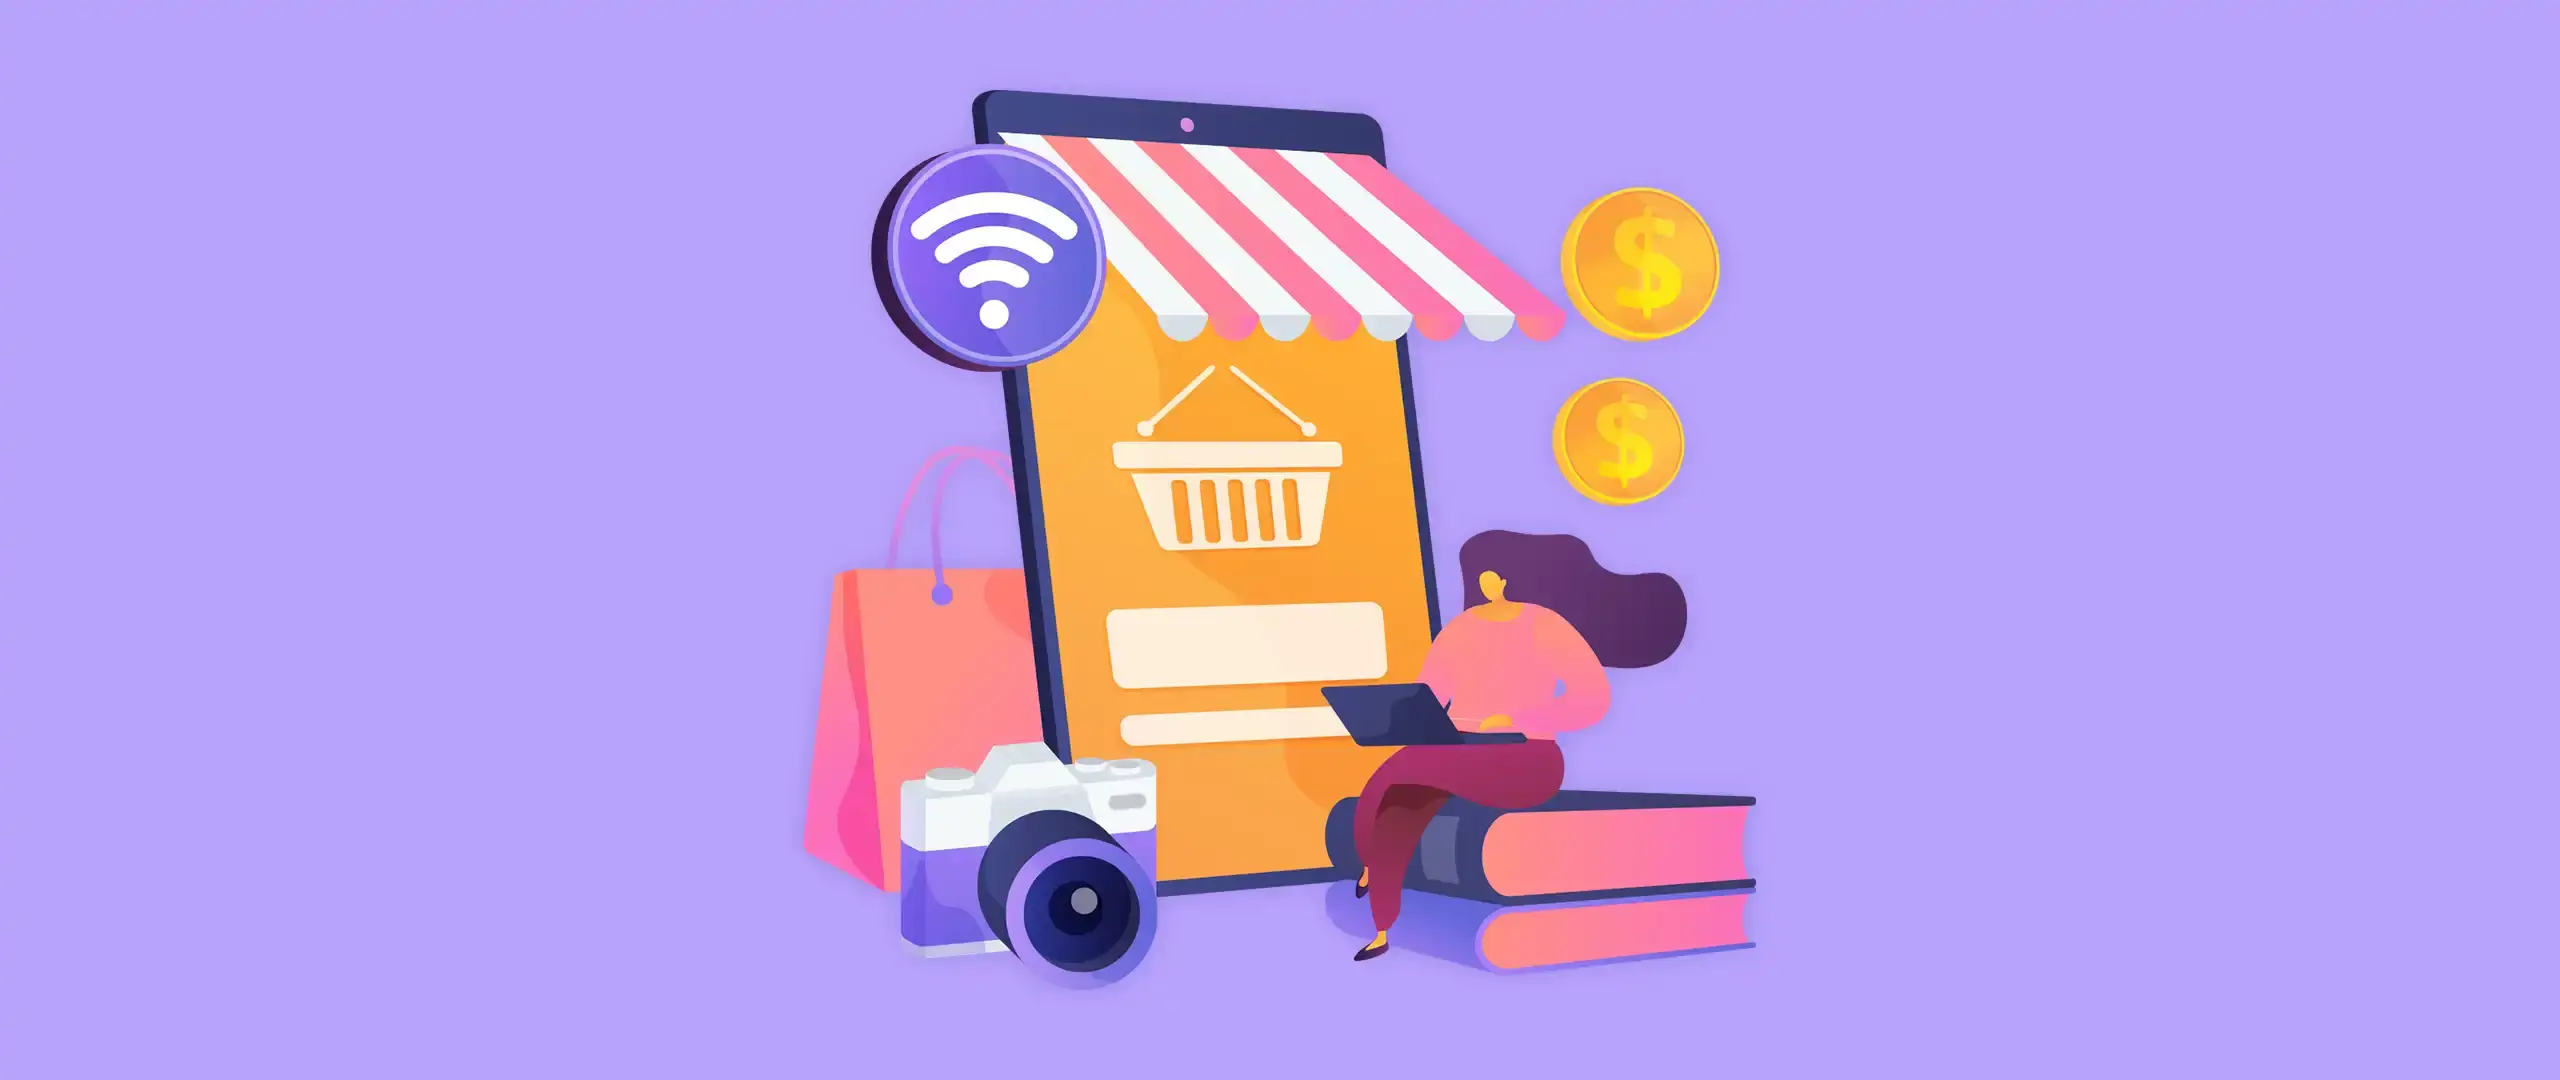 Grow Your Business With These eCommerce Marketing Strategies